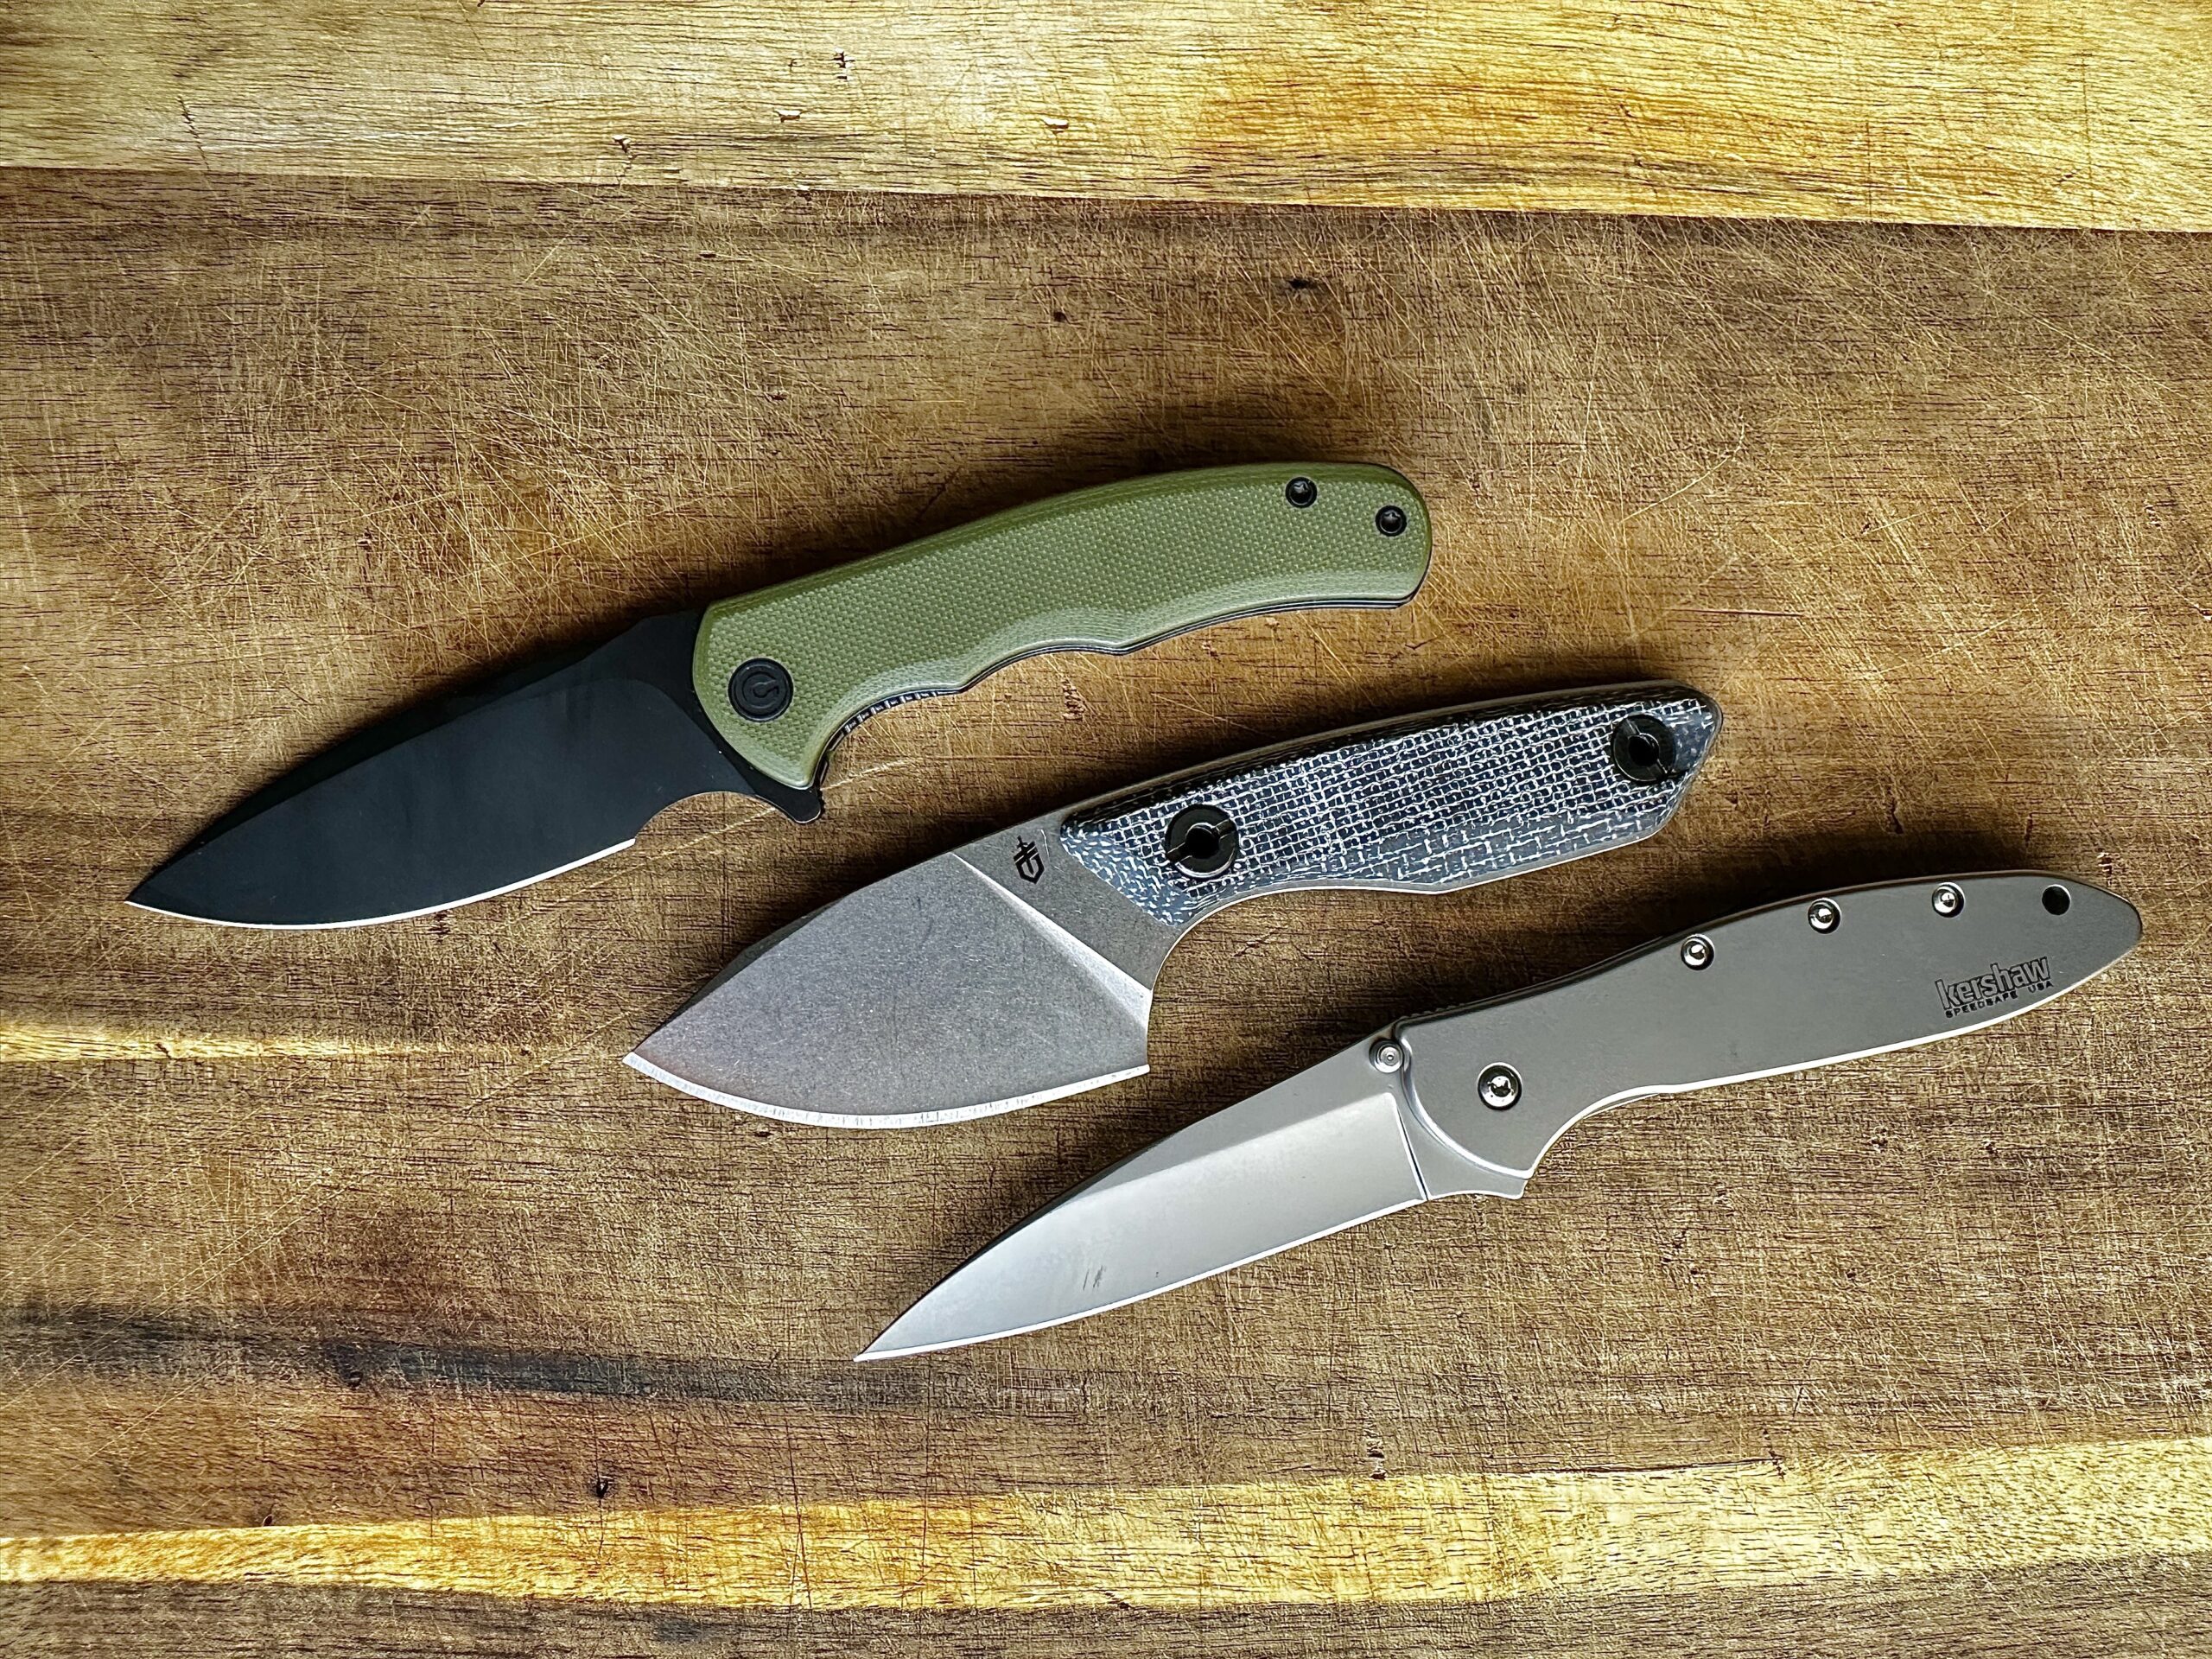 Compare Knife & Outdoor Gear Sales from REI, Cabela's, BladeHQ